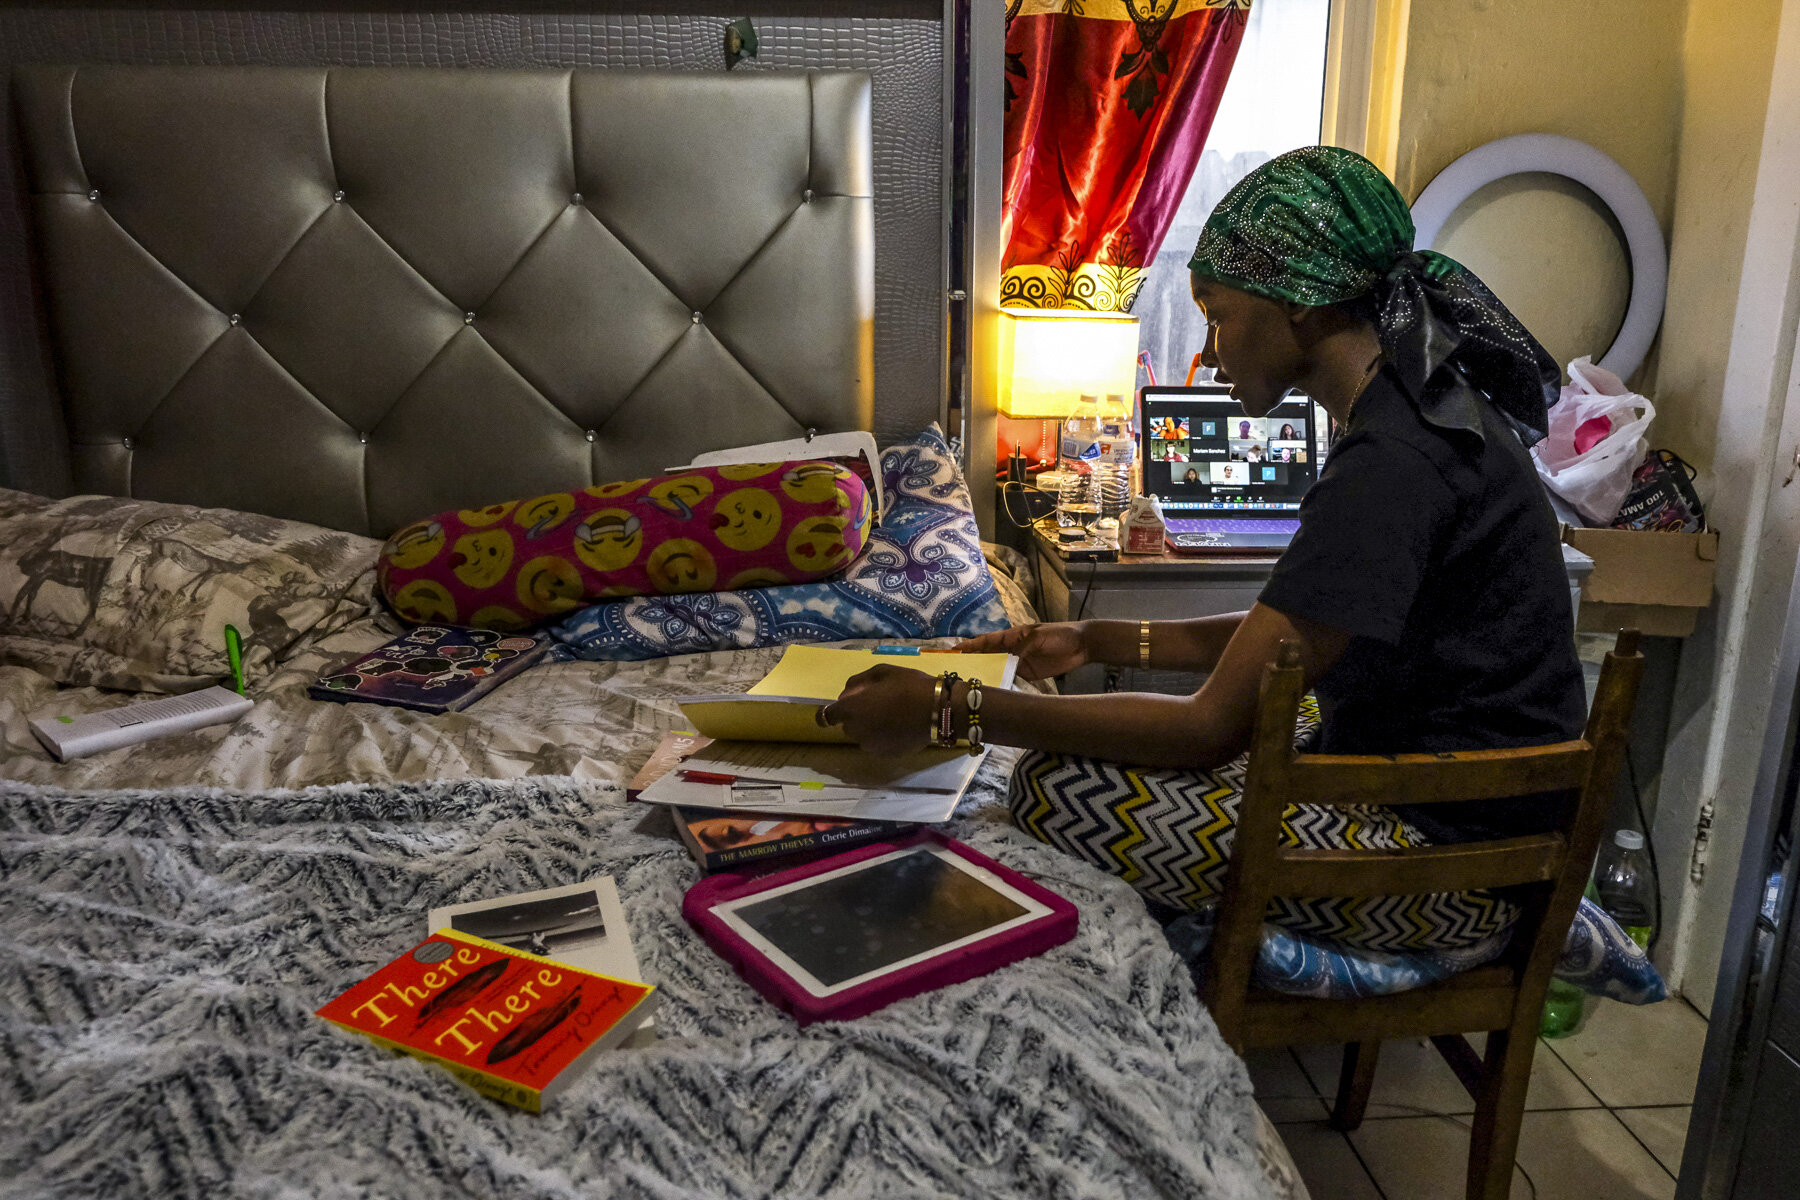  USA, San Diego, CA, November 5, 2020. &nbsp; In the bedroom that she shares with her children, Musa sorts through notebooks and class materials for her UCSD indigenous literature course. With two elementary school children of her own, Musa also navi